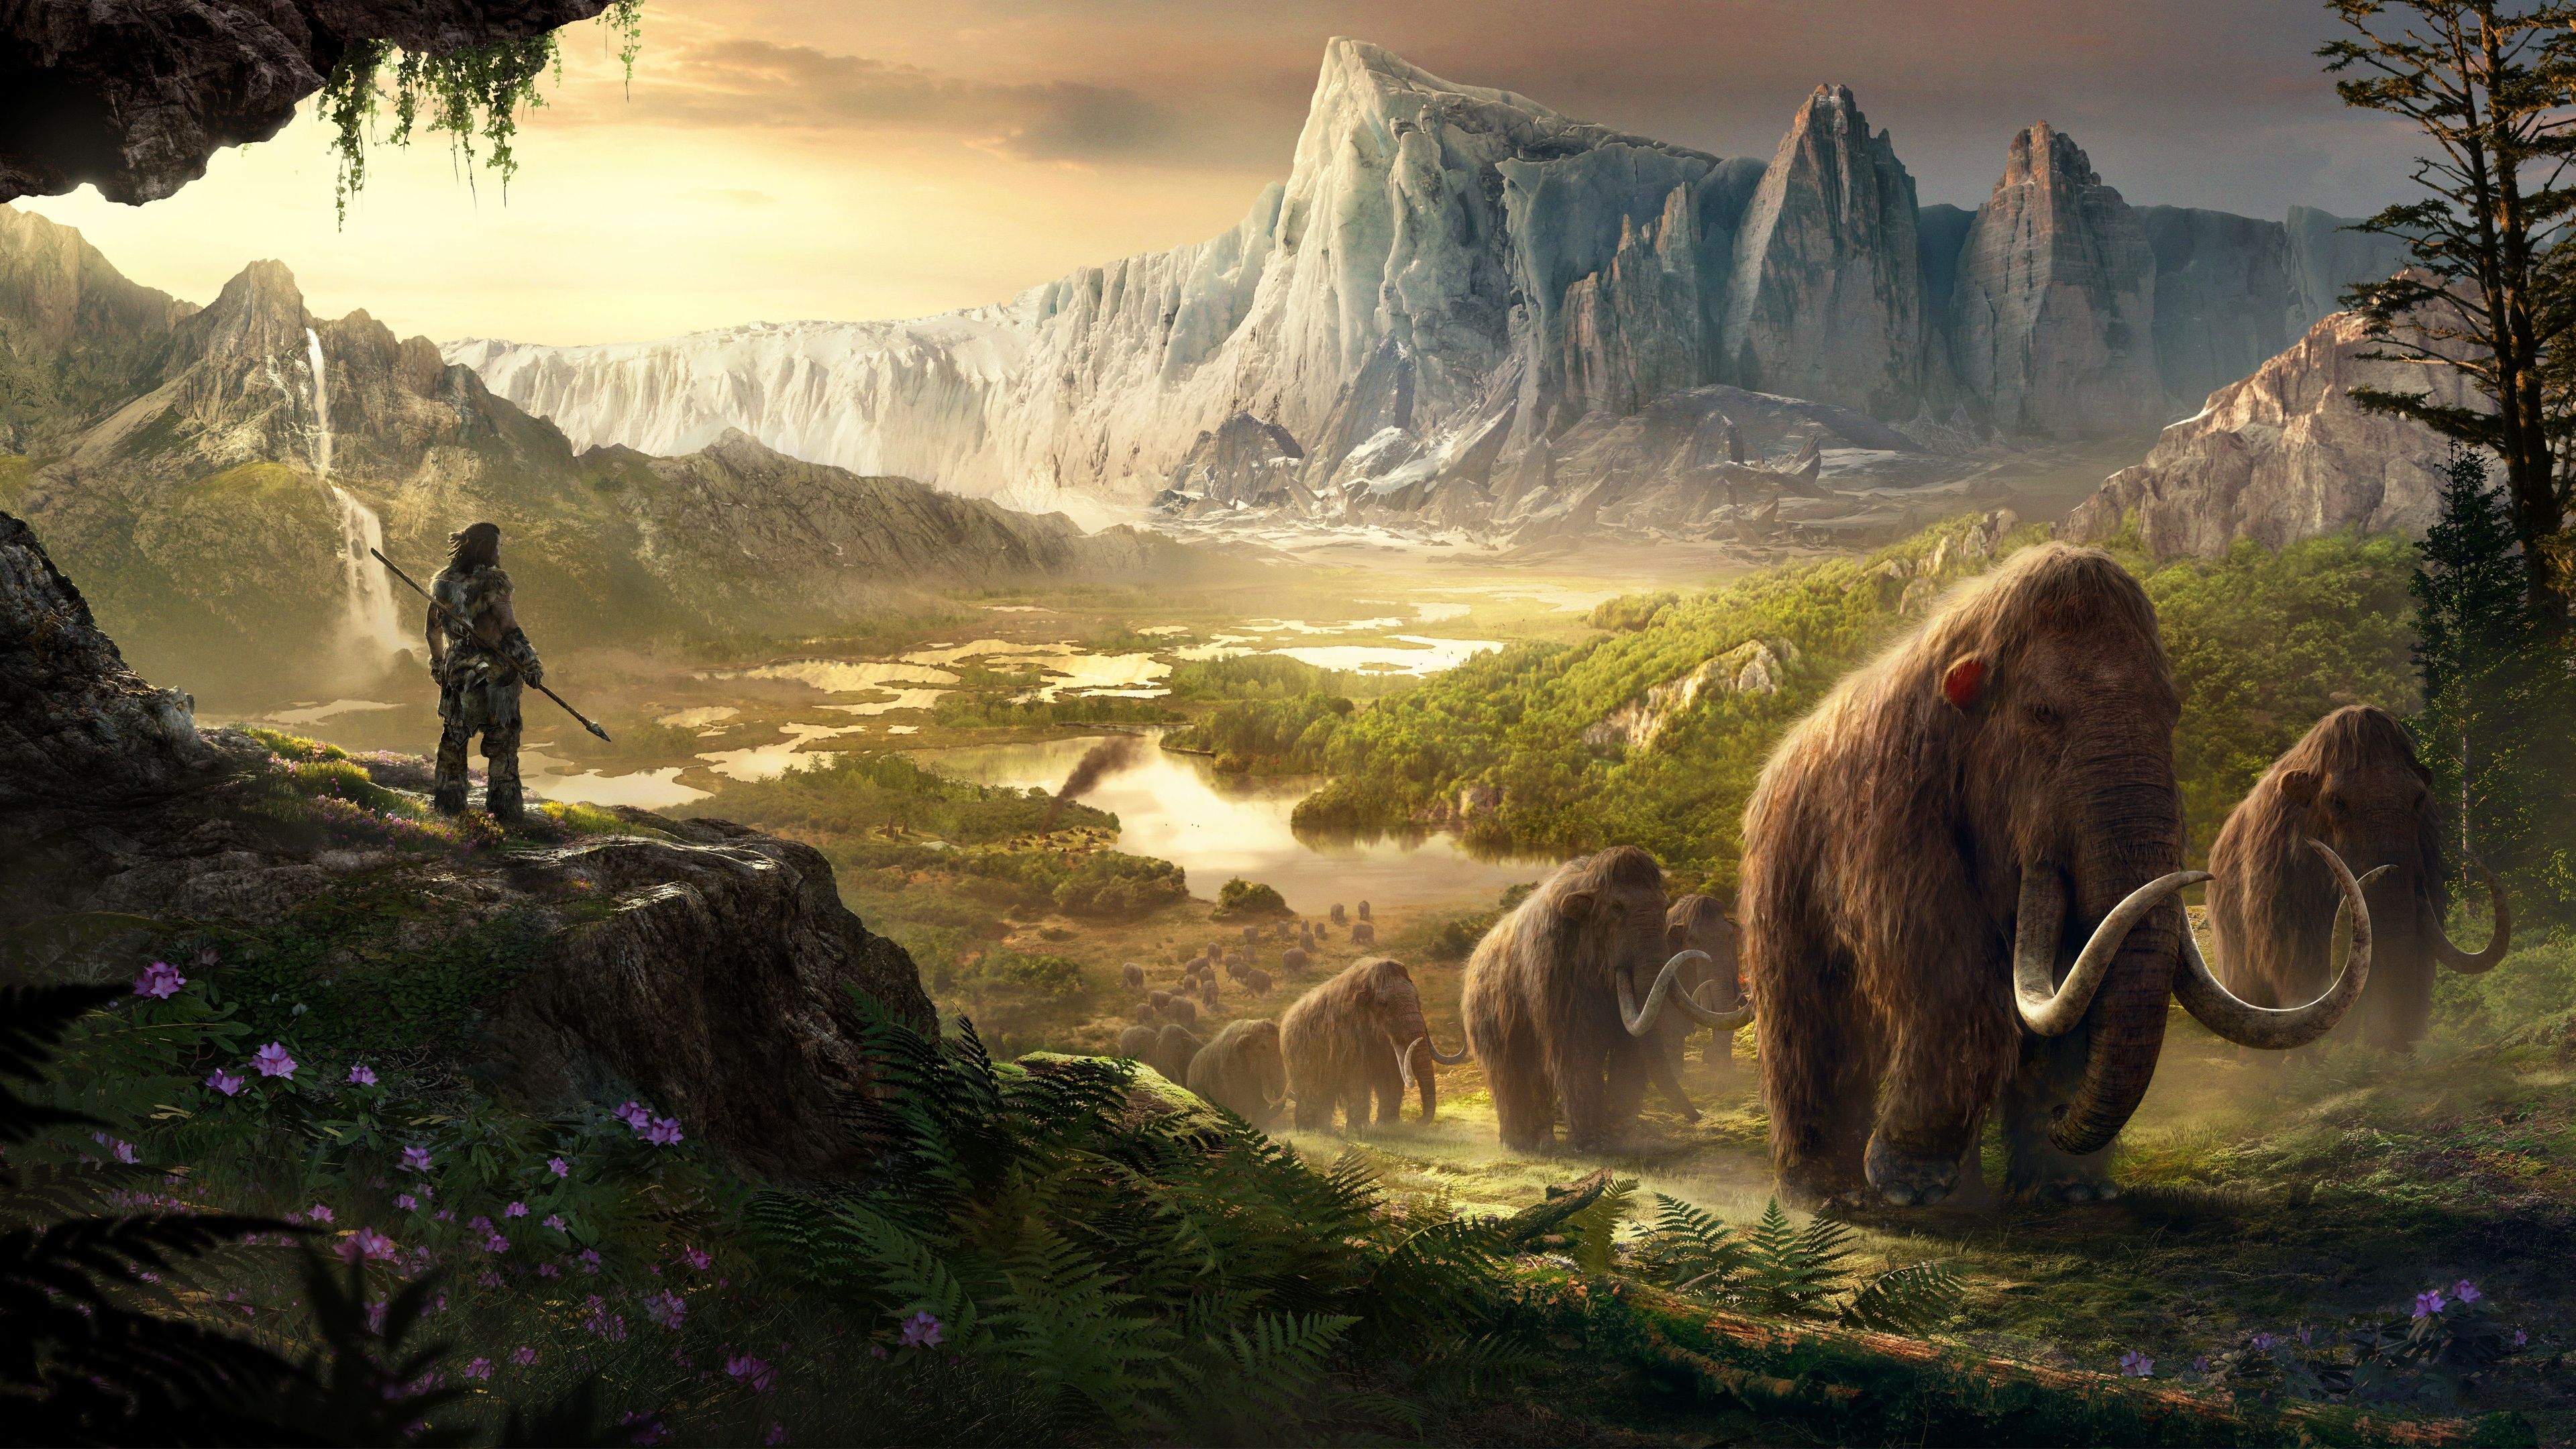 Prehistoric Stone age wallpaper inspired by far cry primal4K